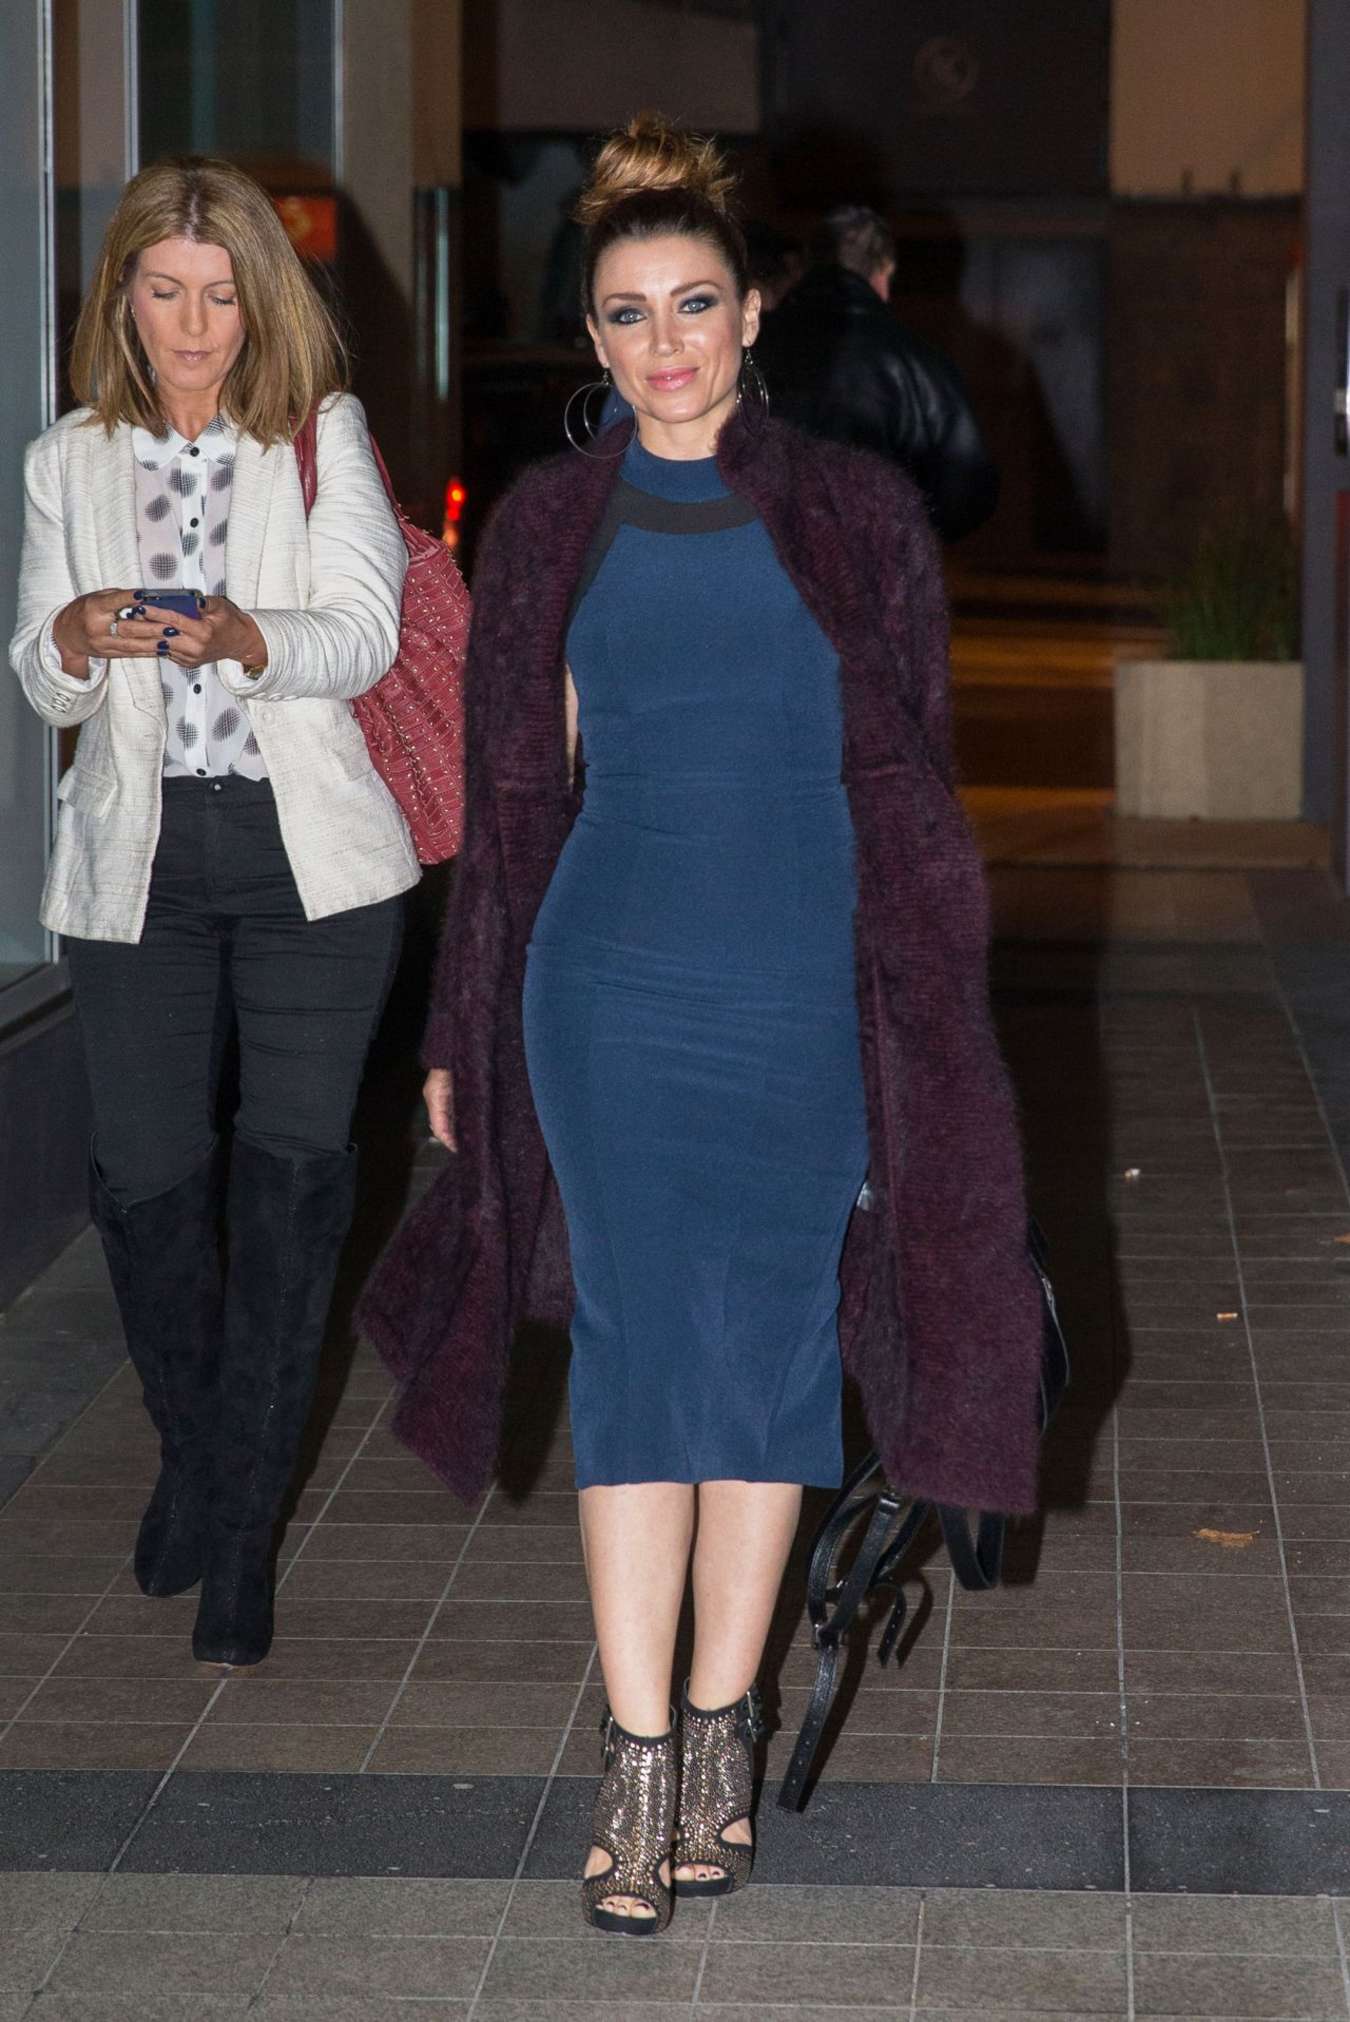 Dannii Minogue Arrives at The Project in Melbourne